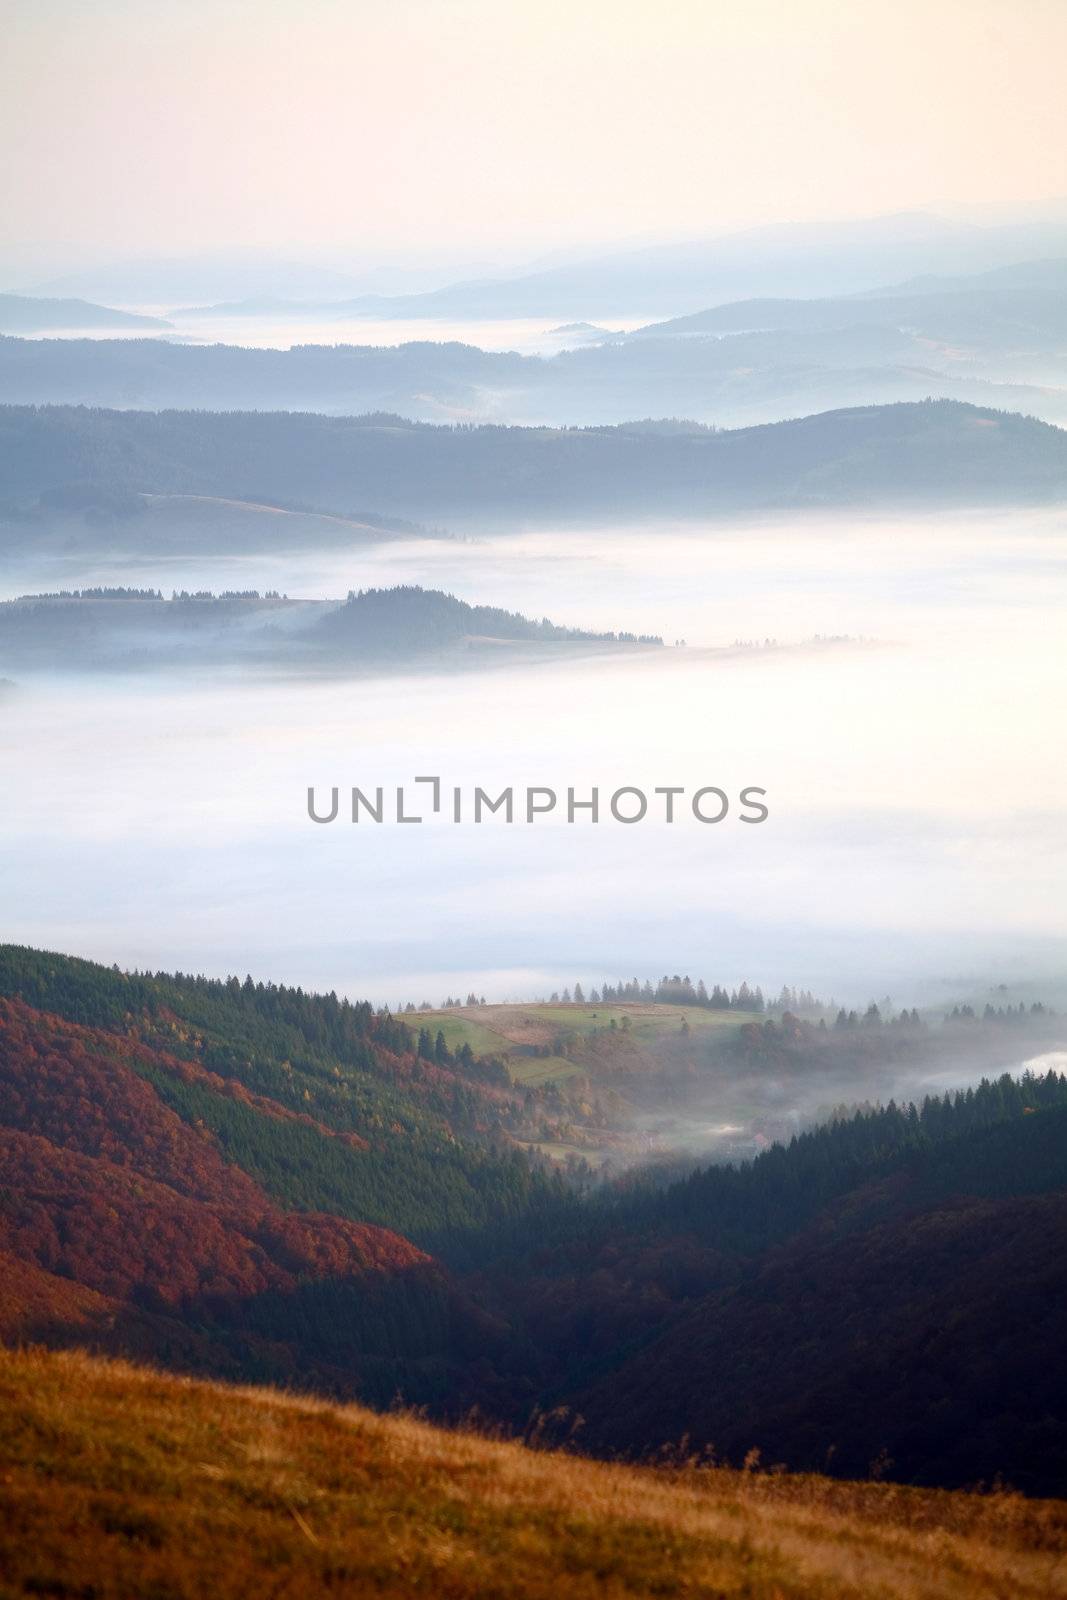 An image of mist in the dark mountains